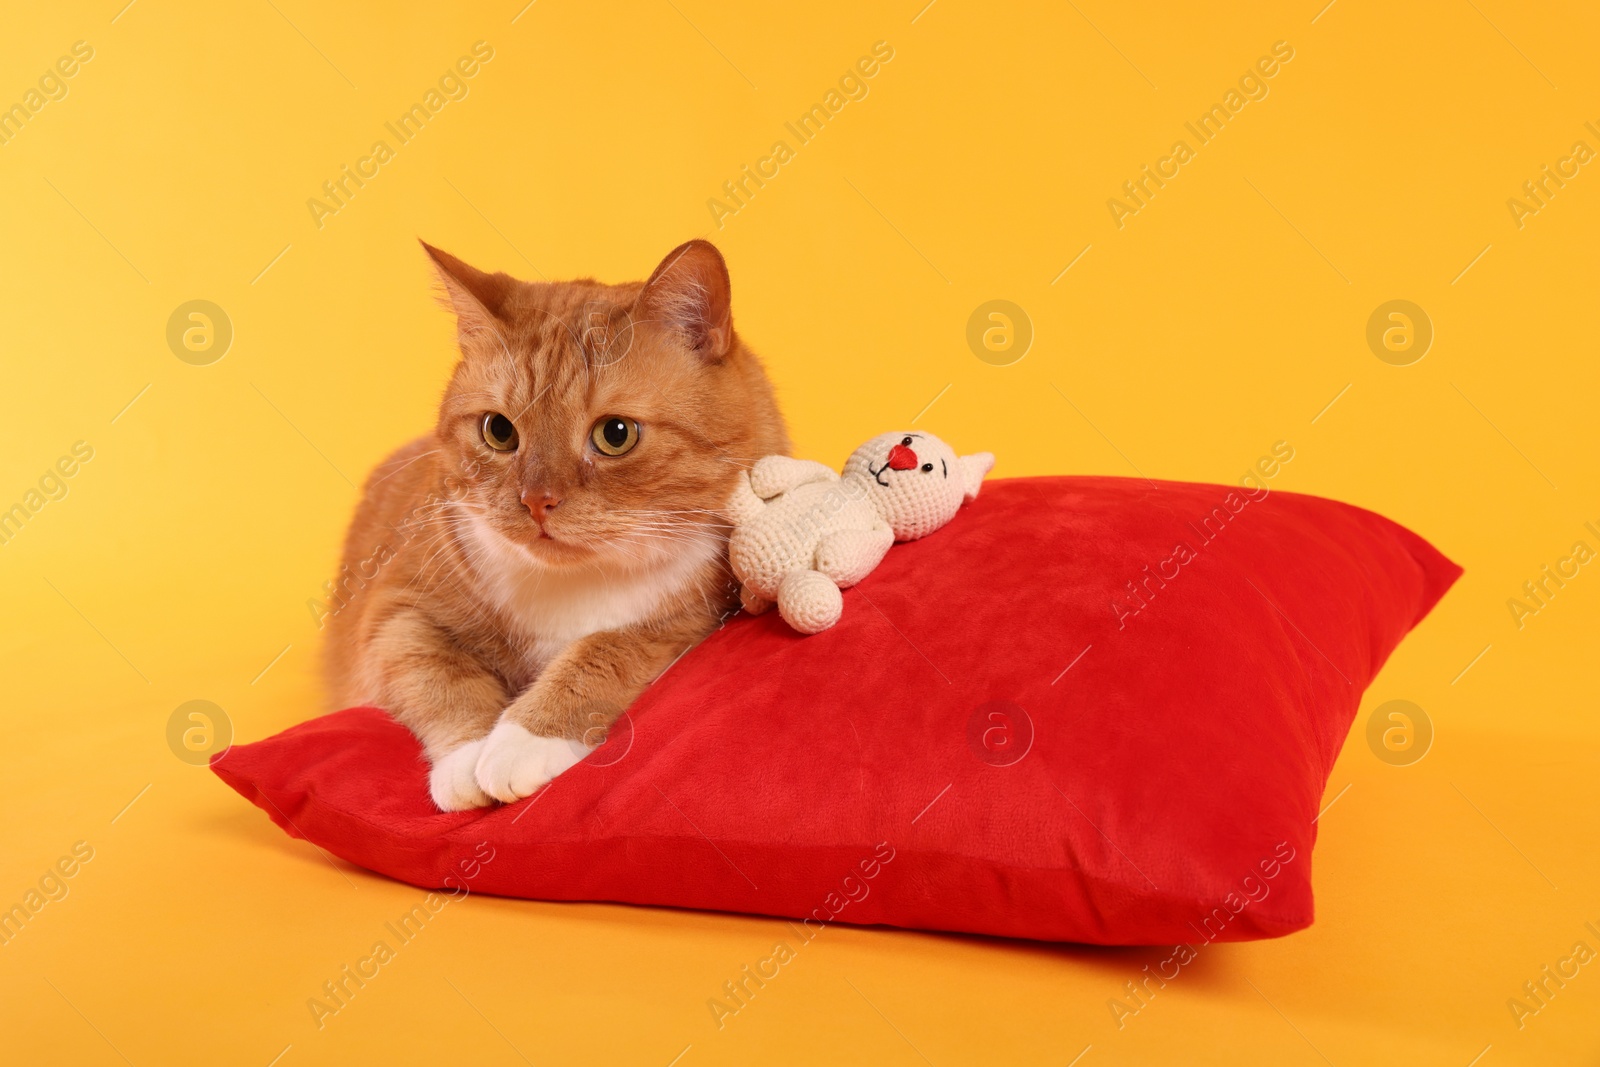 Photo of Cute ginger cat with crocheted bunny and red pillow on orange background